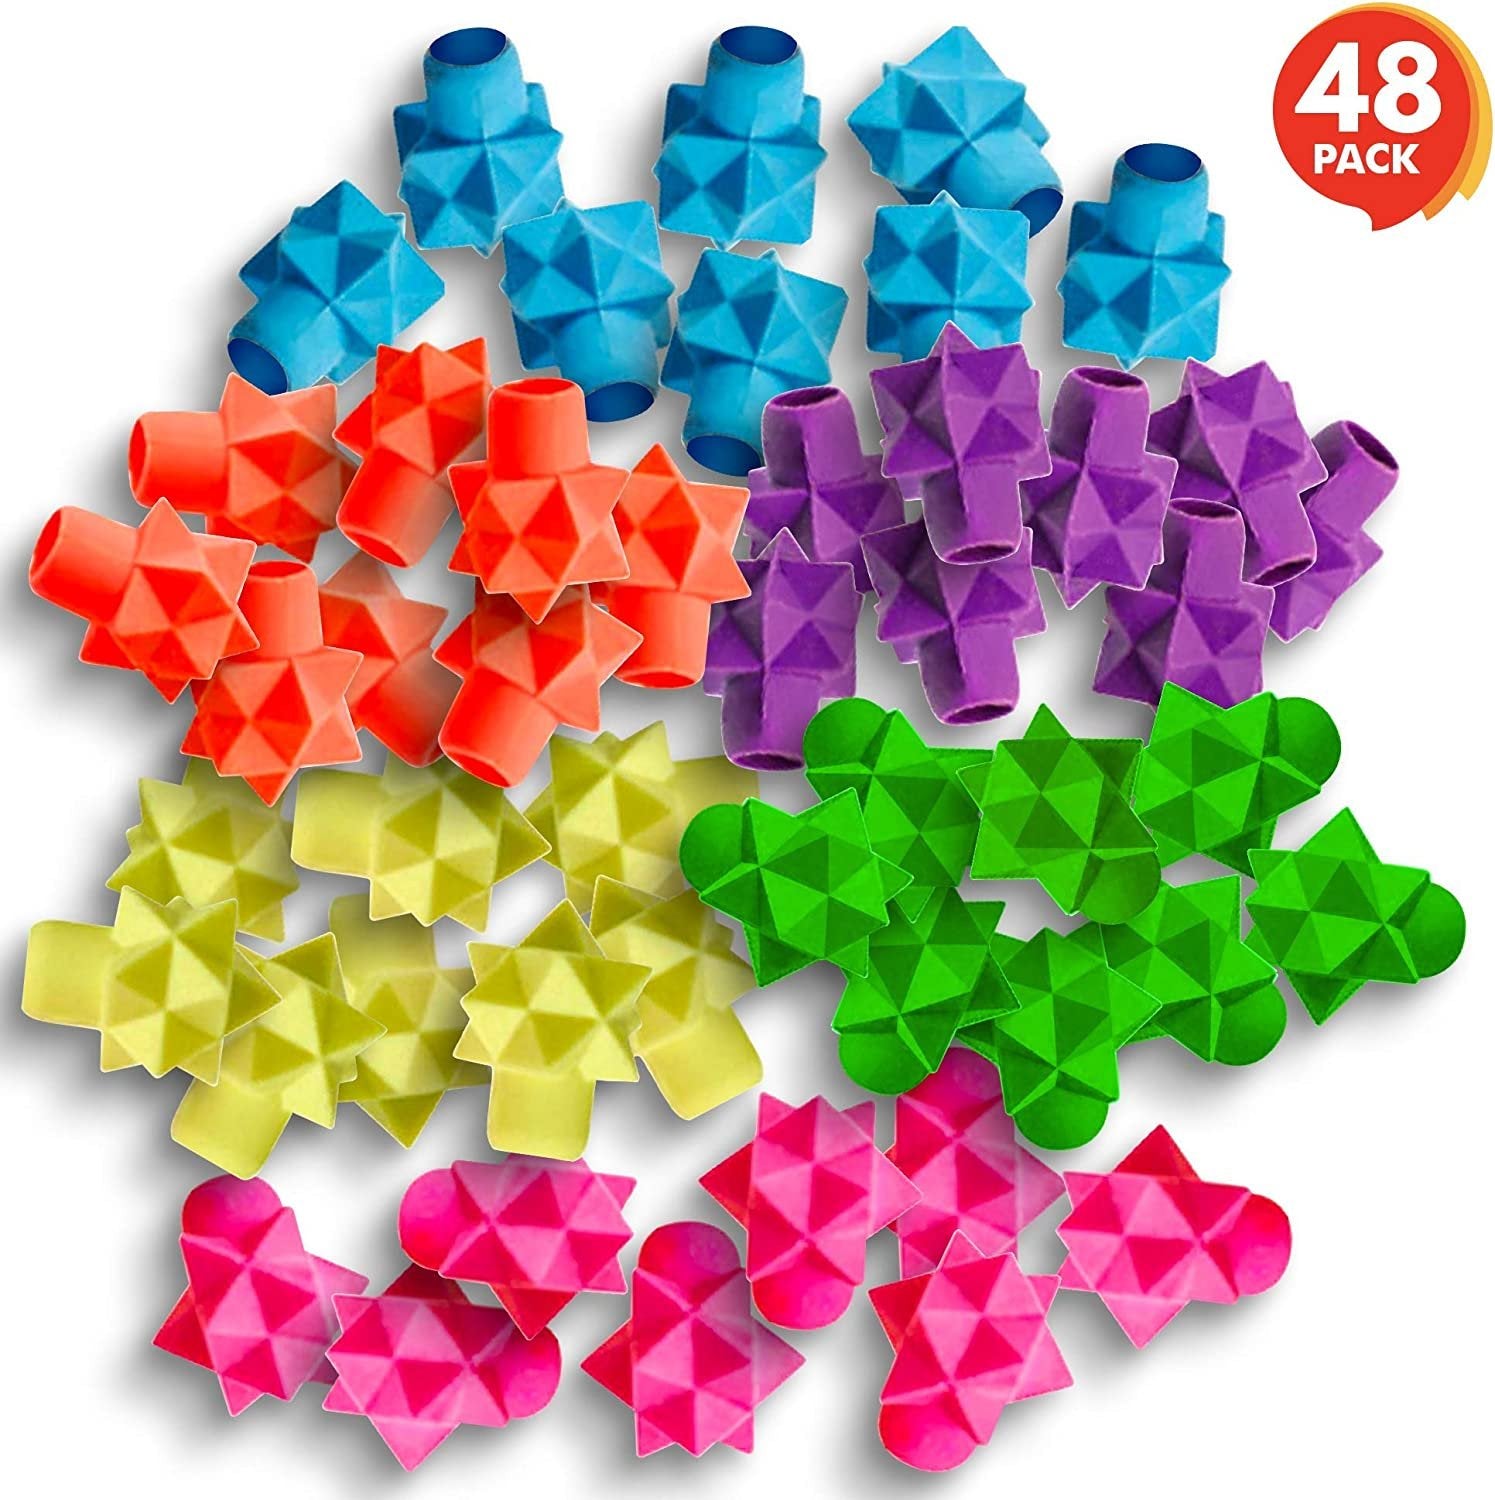 Star Pencil Top Erasers for Kids - 48 Pcs - Colorful Eraser Caps Toppers for Boys and Girls - Classroom Prize, Teacher Rewards, Stationery Birthday Party Favors, Goody Bag Stuffers